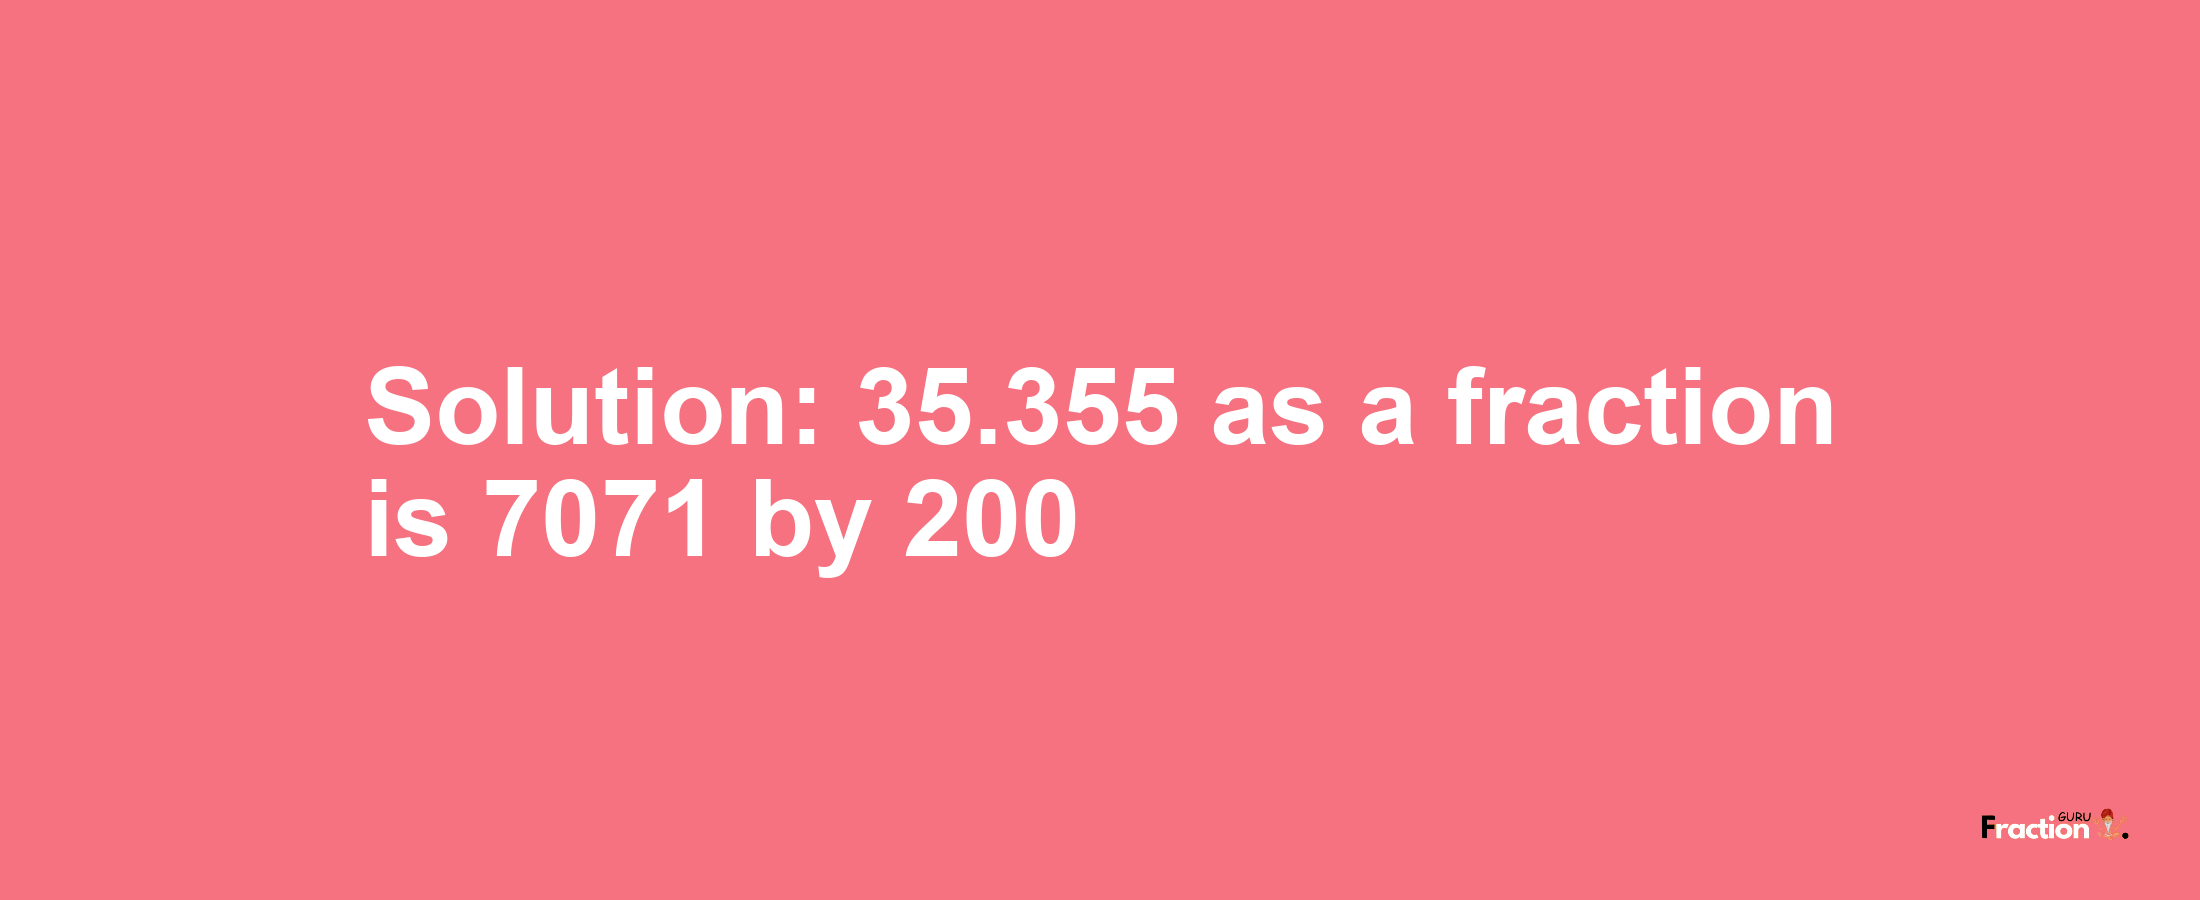 Solution:35.355 as a fraction is 7071/200